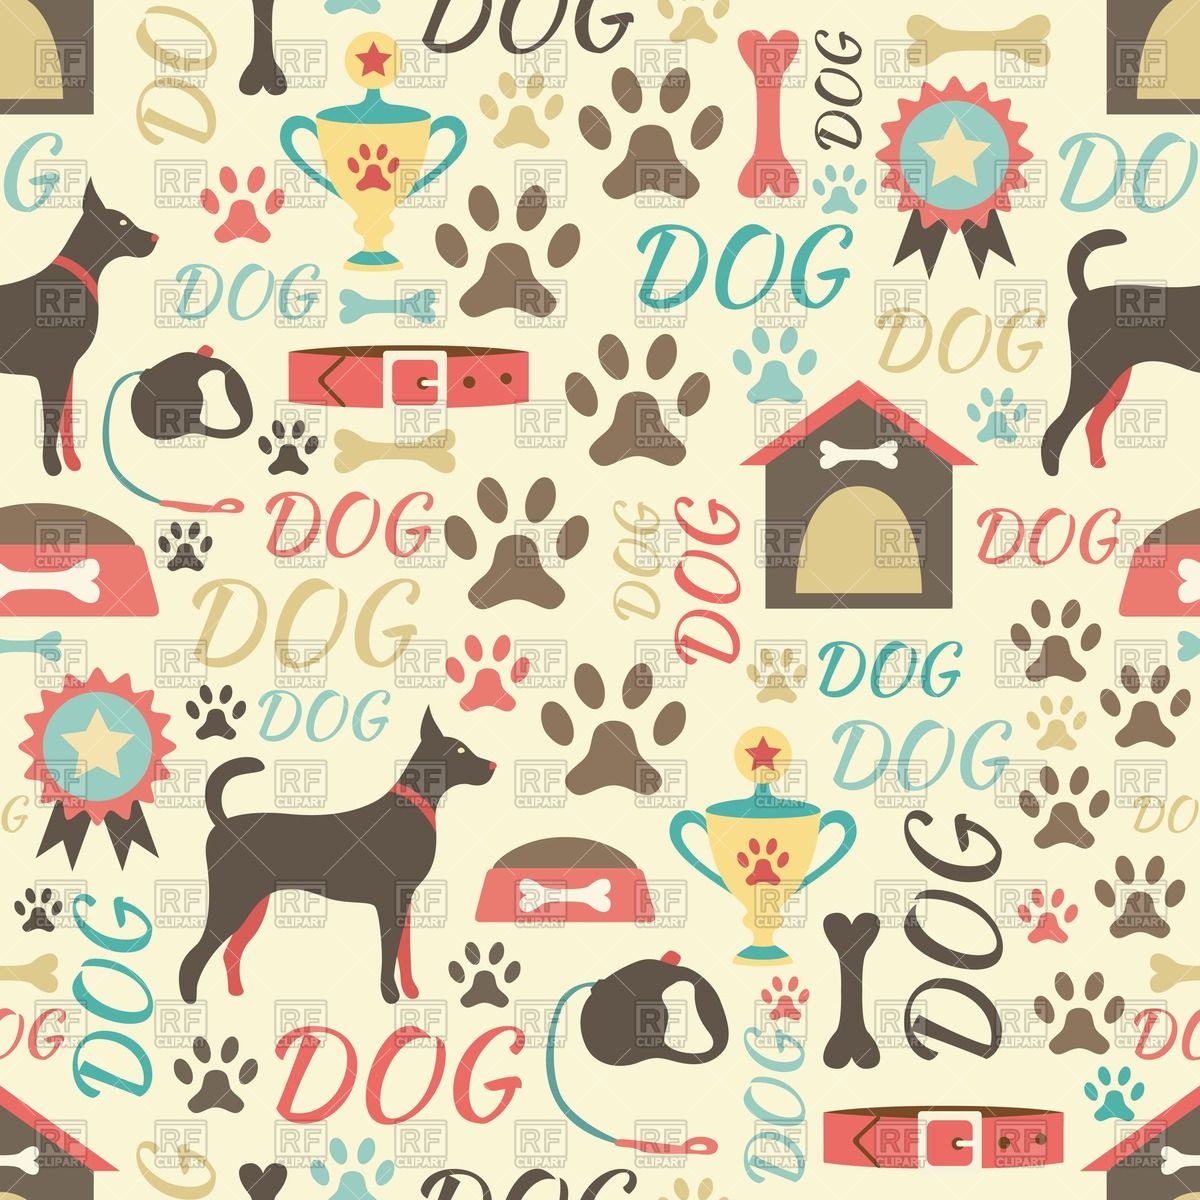 Dog Doghouse Collars Paw Prints And Medals Background